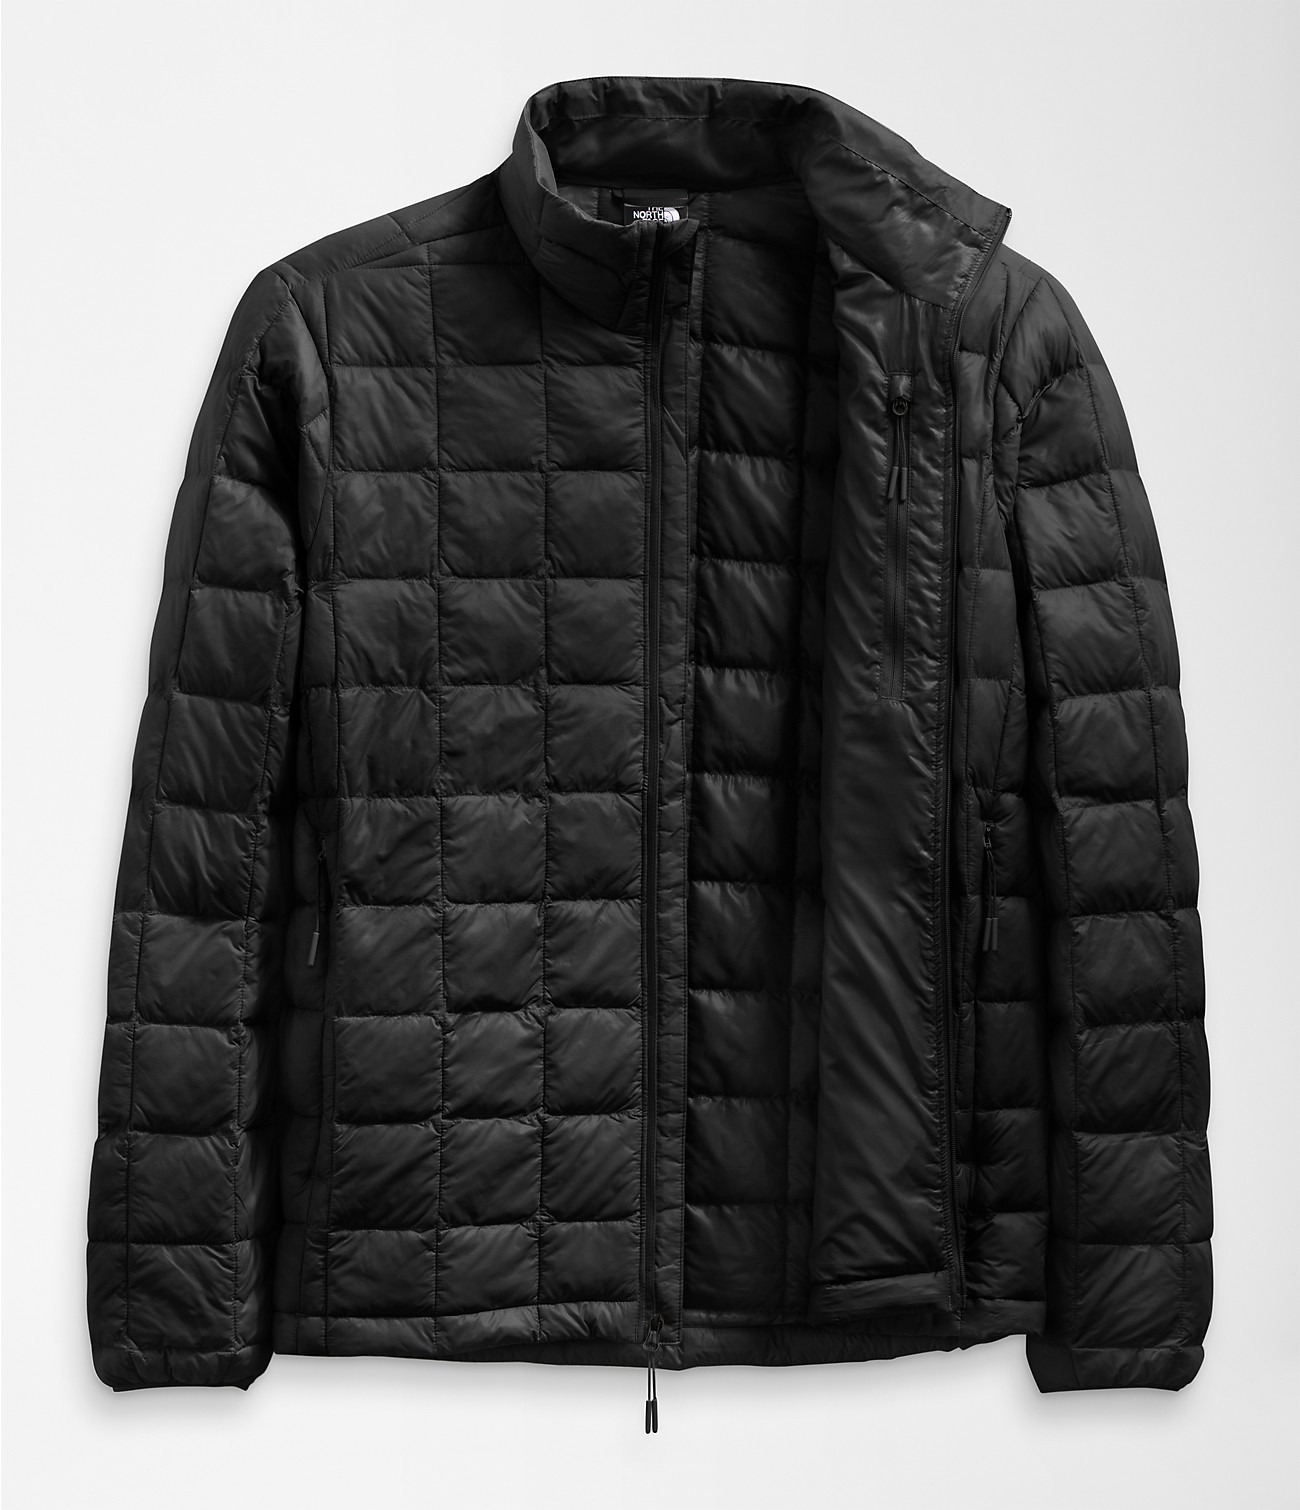 Unlock Wilderness' choice in the North Face Vs Tommy Hilfiger comparison, the ThermoBall™ Eco Jacket 2.0 by The North Face